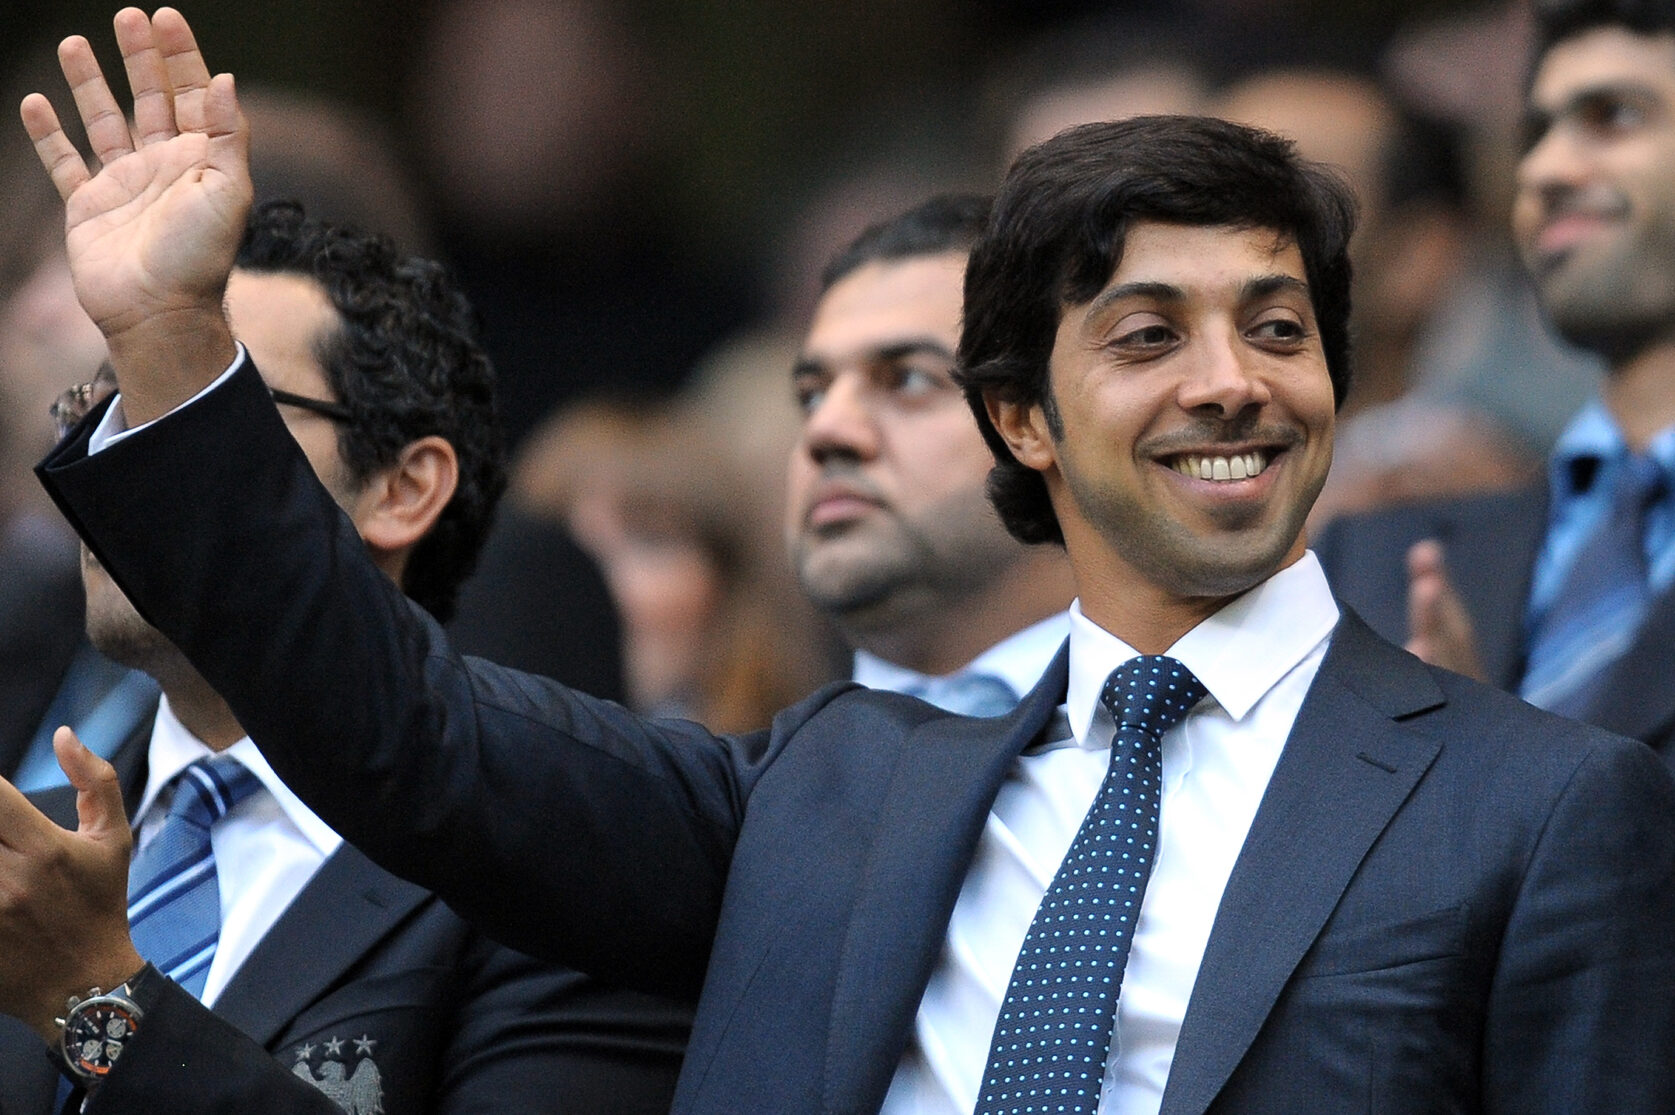 Manchester City owner Sheikh Mansour bin Zayed buys FA Cup